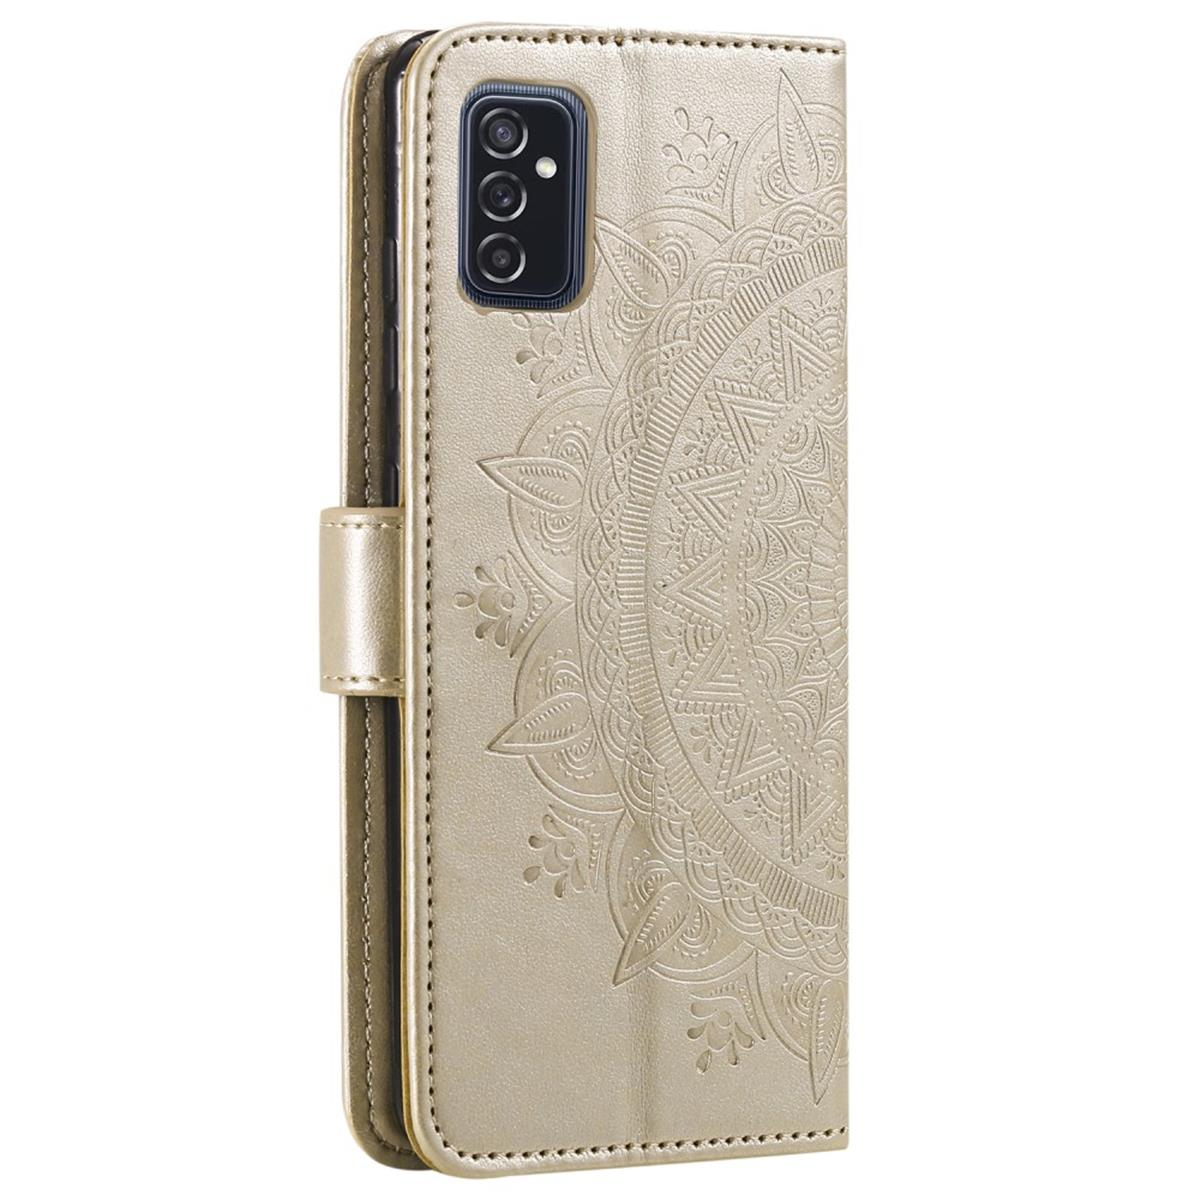 COVERKINGZ Klapphülle mit Mandala Muster, Gold 5G, Galaxy Samsung, M52 Bookcover